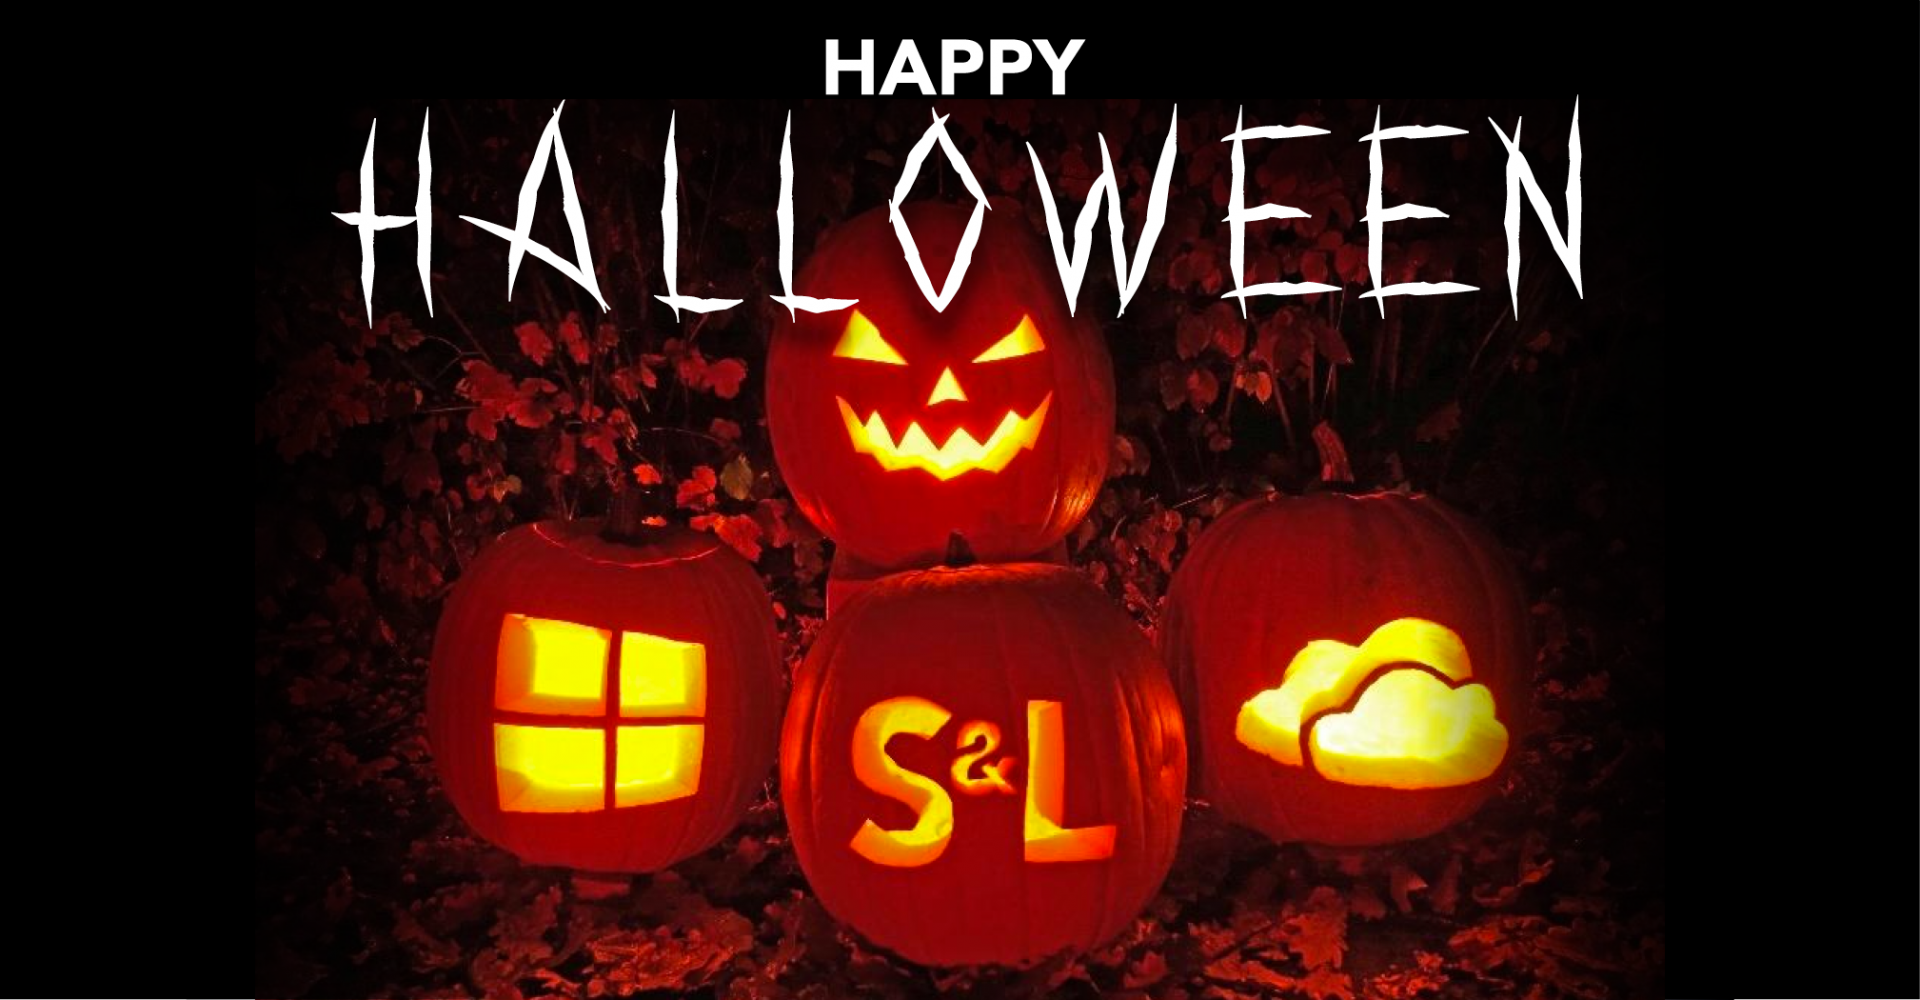 Happy Halloween 2017 – Don’t be scared of the Cloud!